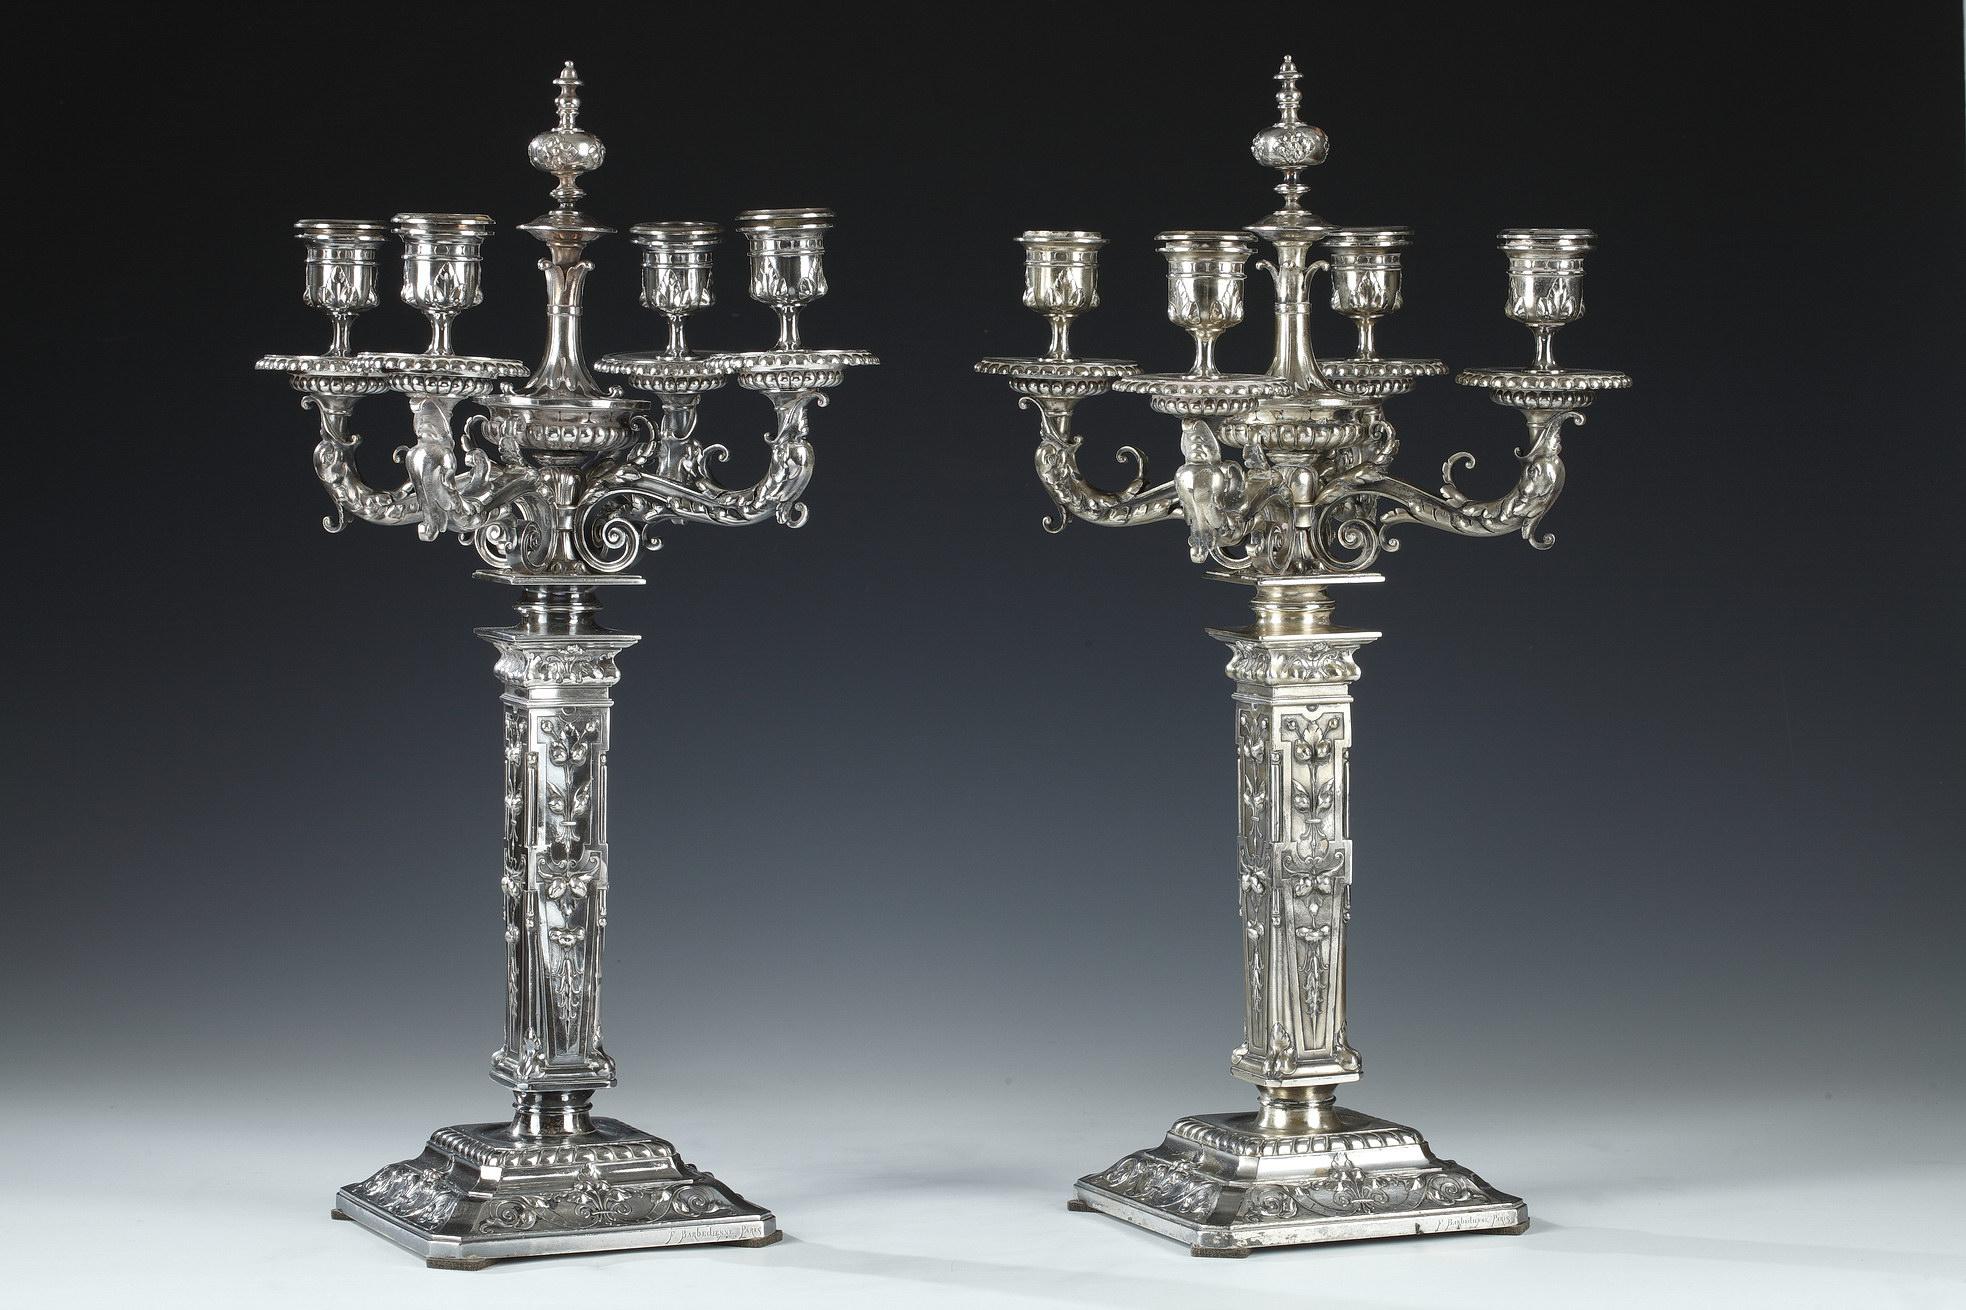 Signed F. Barbedienne Paris; D. Attarge Fit; C. Sevin inv 1869

Rare pair of Renaissance style candelabra with four light-arms in chiselled and silvered bronze, adorned with an elegant pattern of foliage and godrons. They rest on a square base